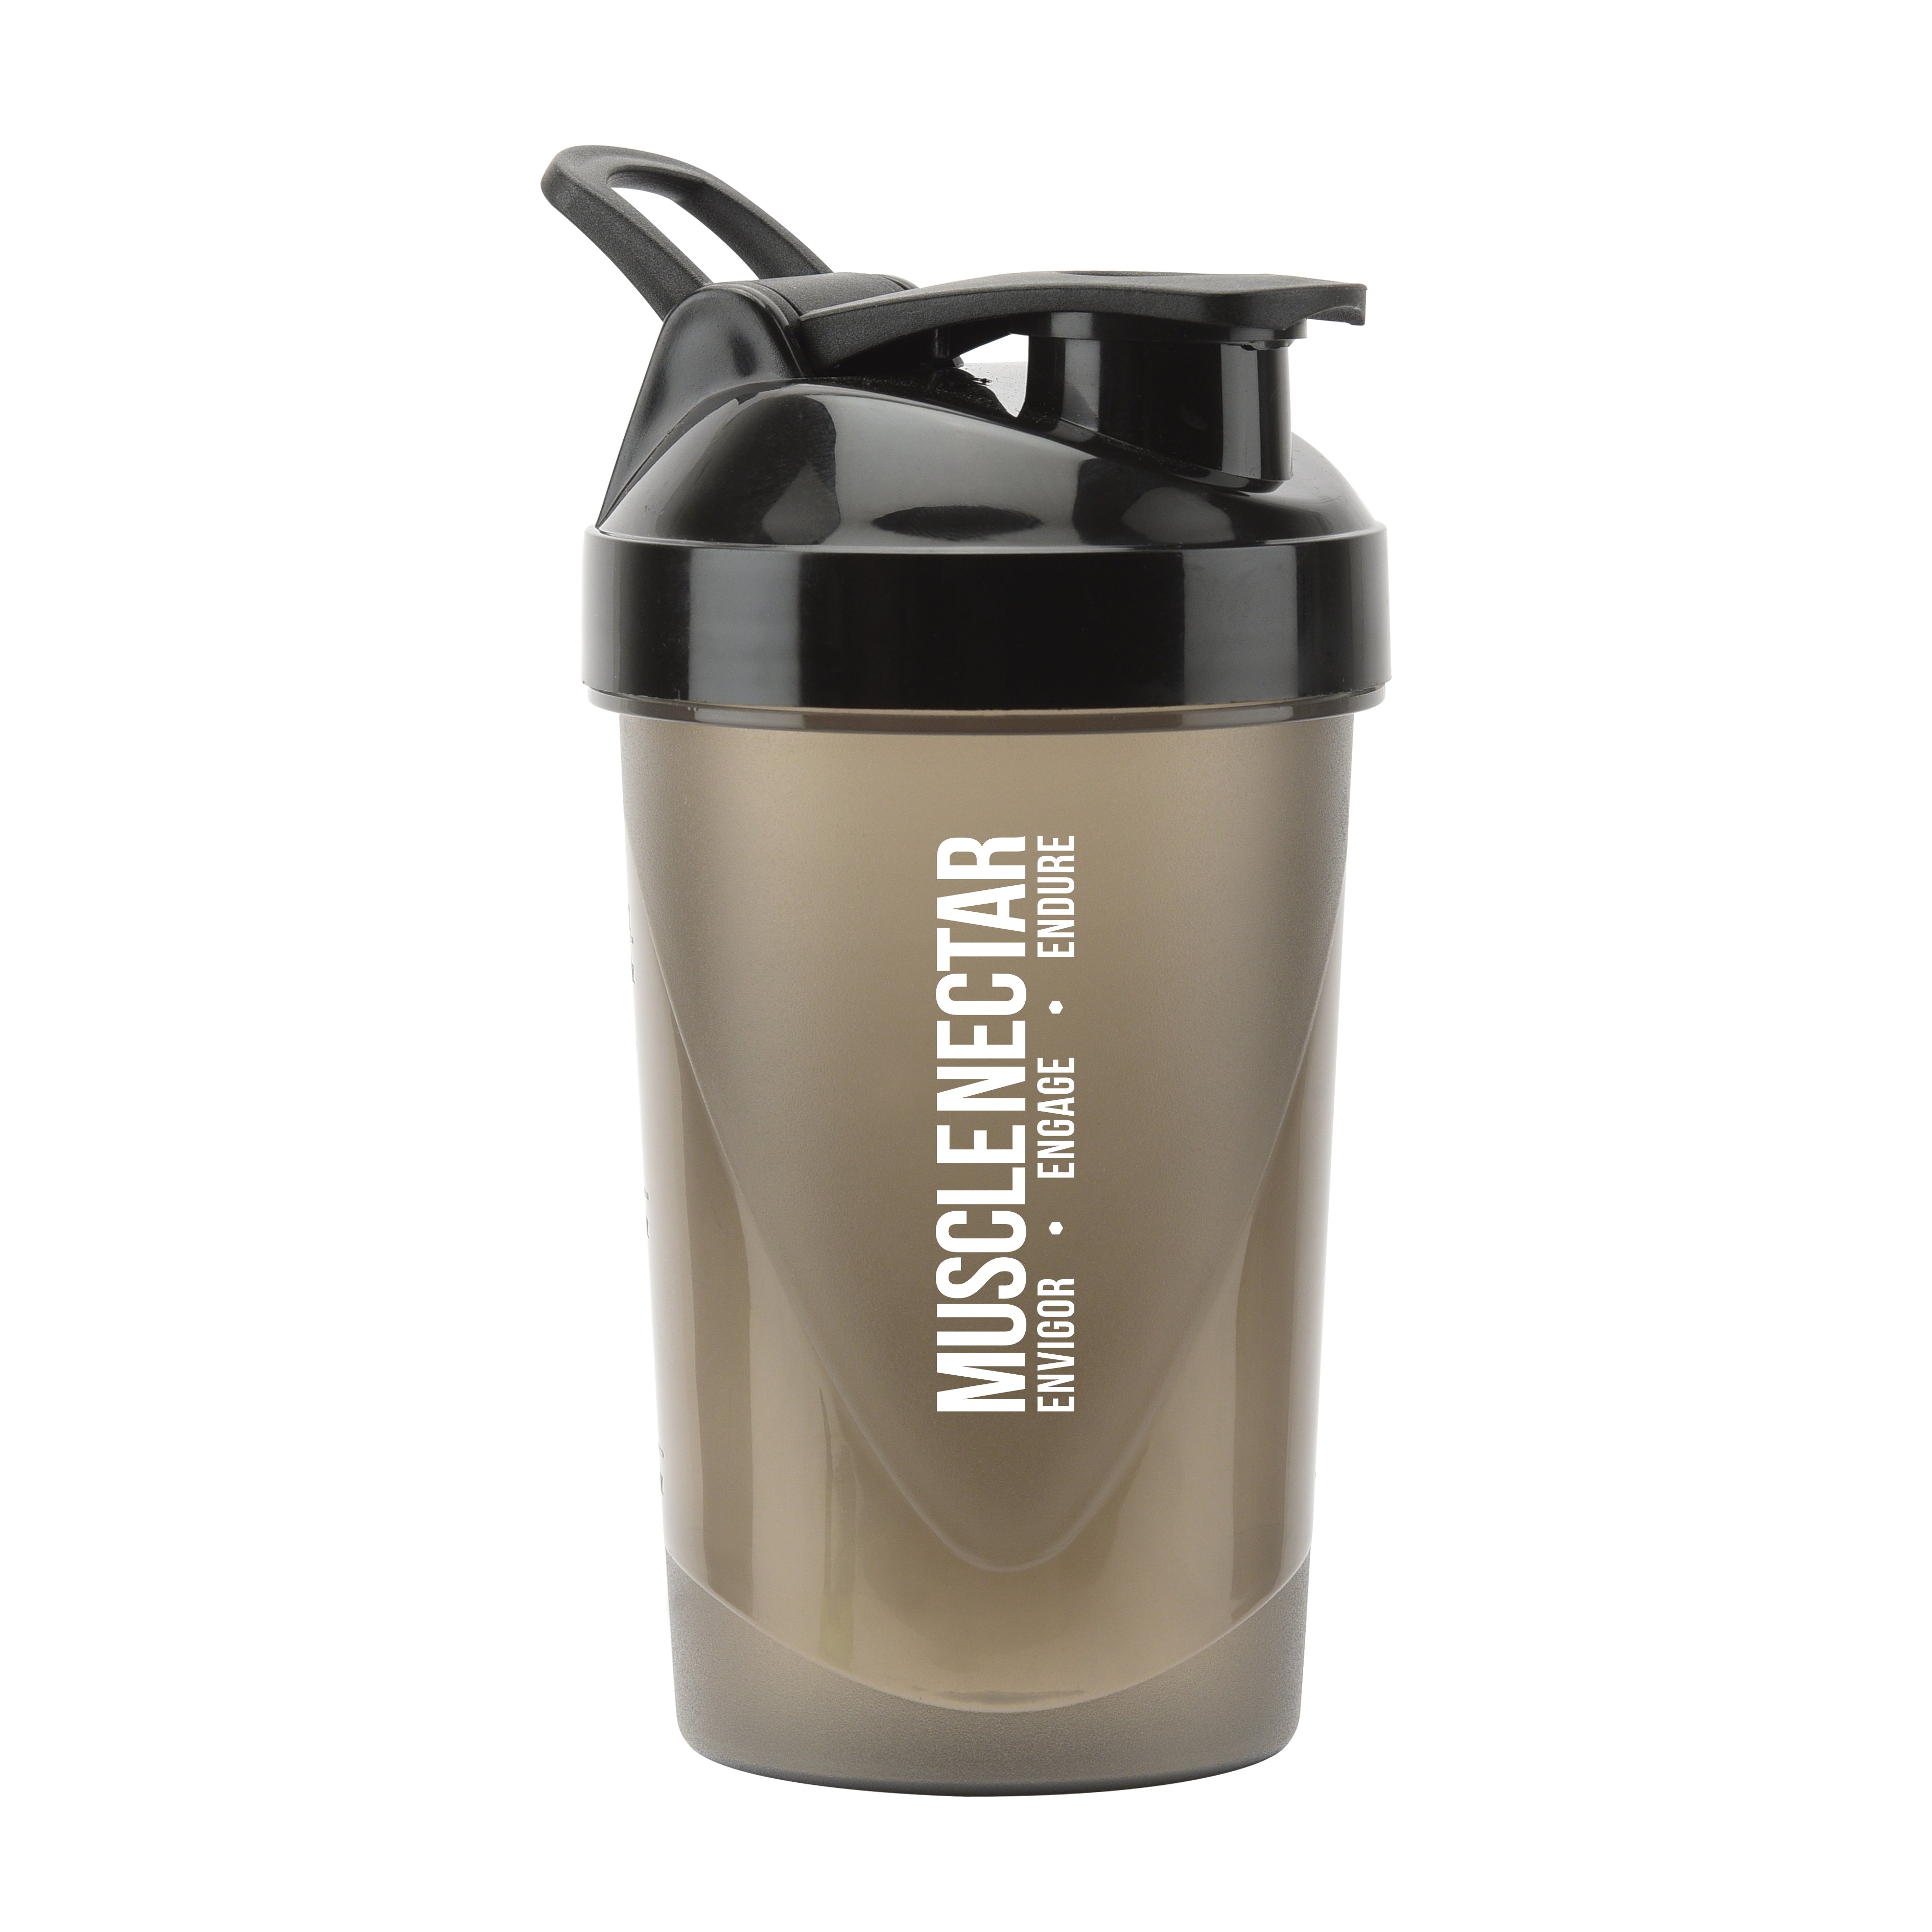 https://cdn.shopify.com/s/files/1/0503/7844/0897/products/Muscle-Nectar-Compact-Shaker-500ml-2.jpg?v=1655217004&width=3782